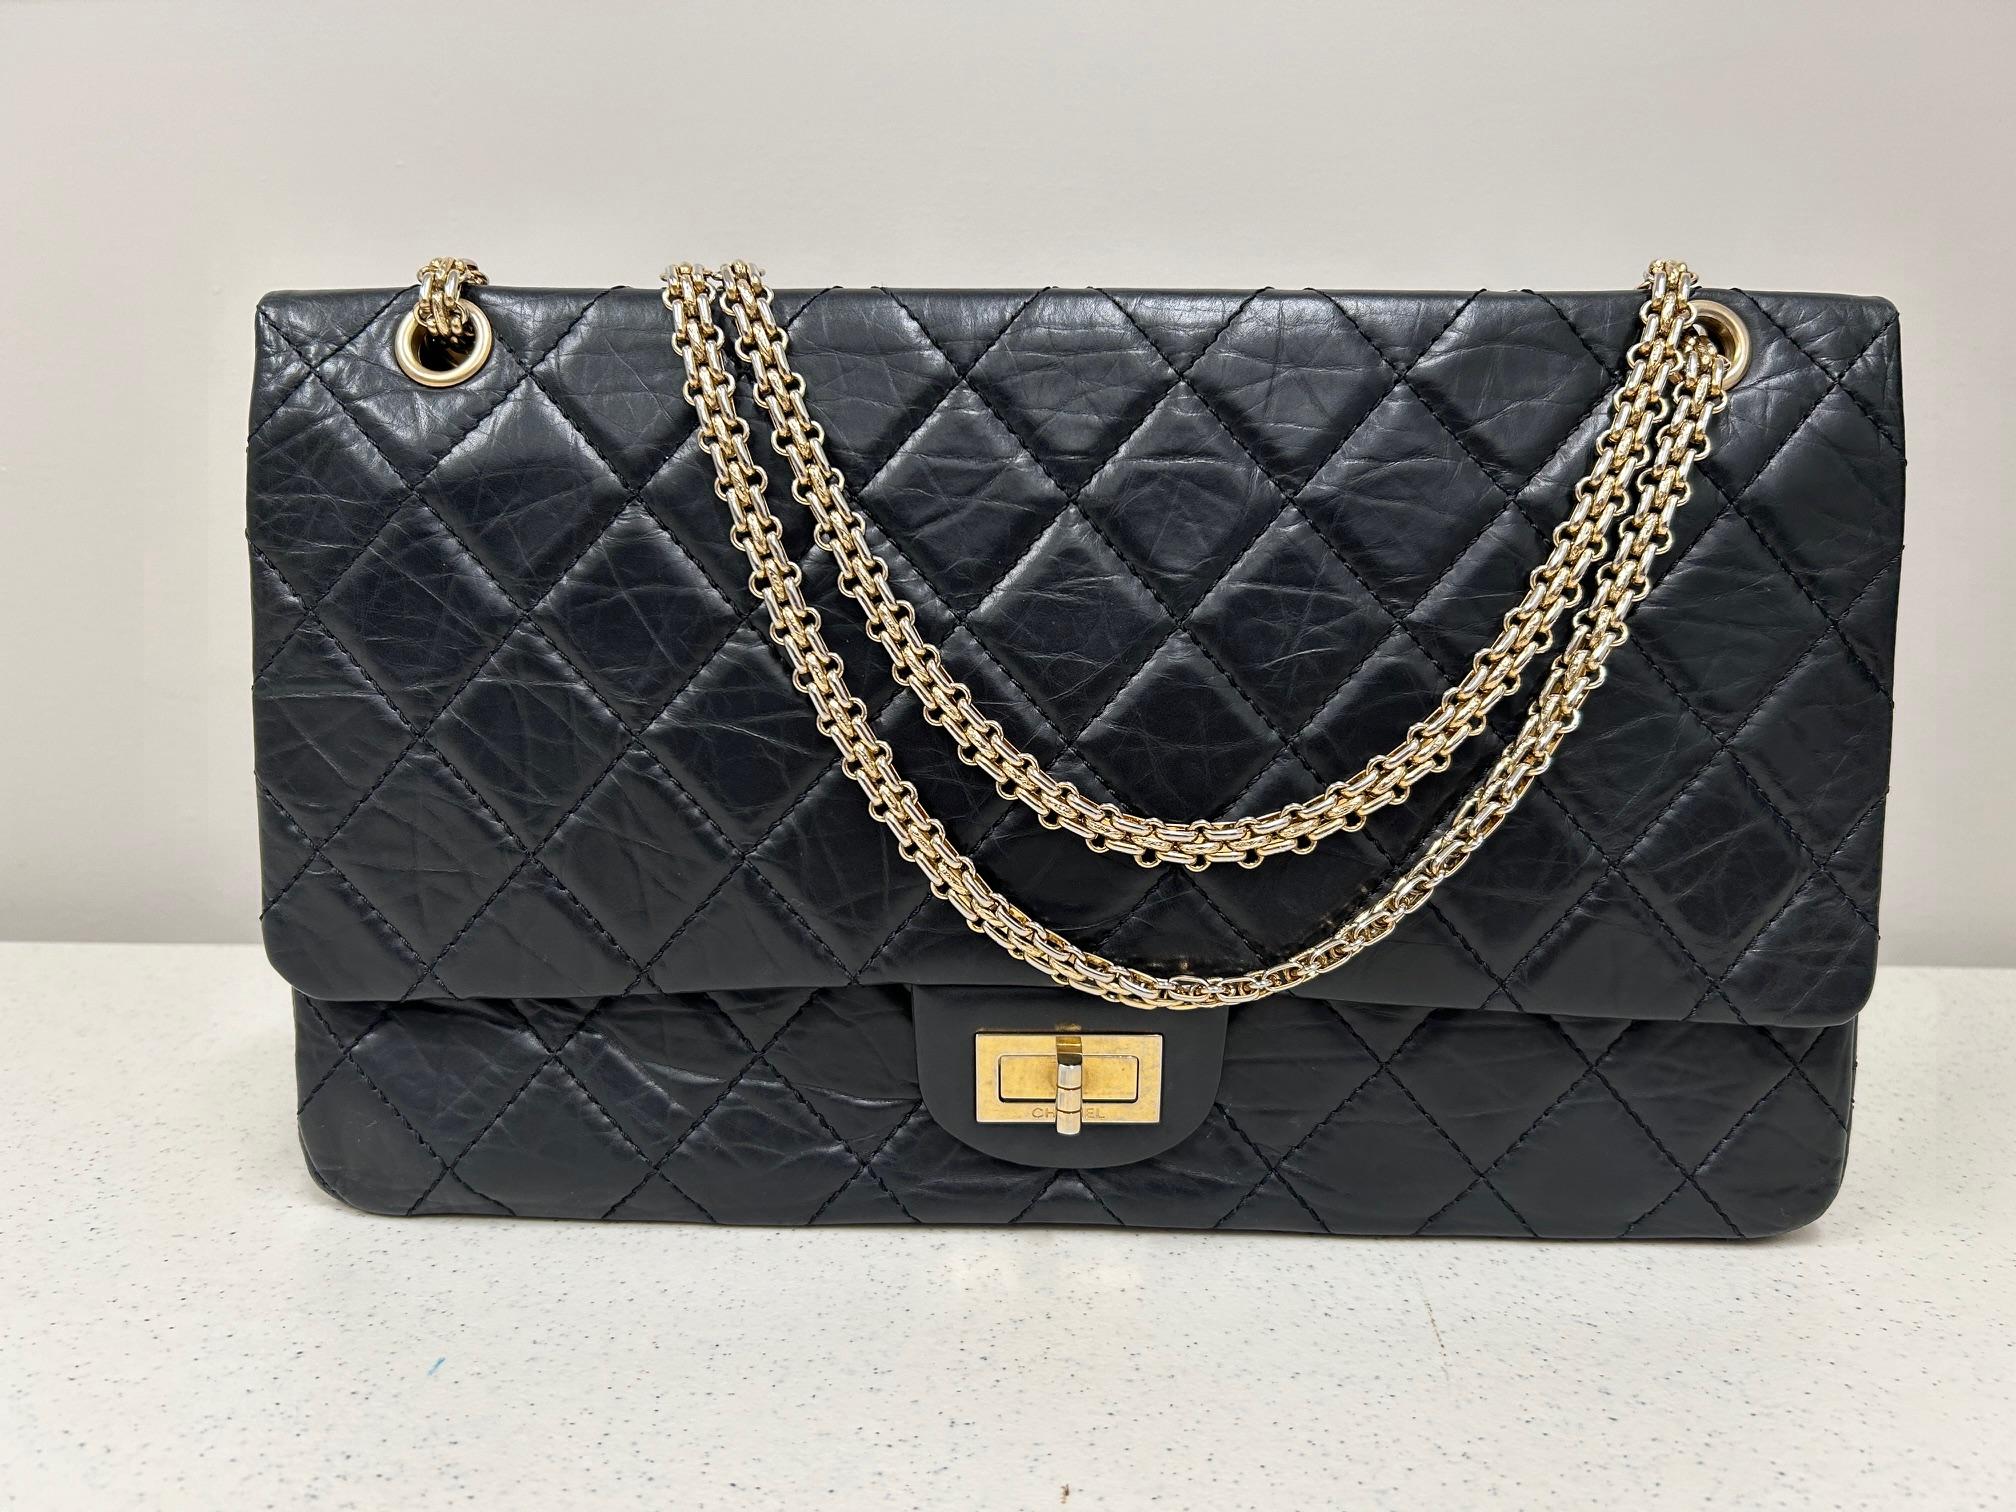 - The Original reissue Chanel 255 with 